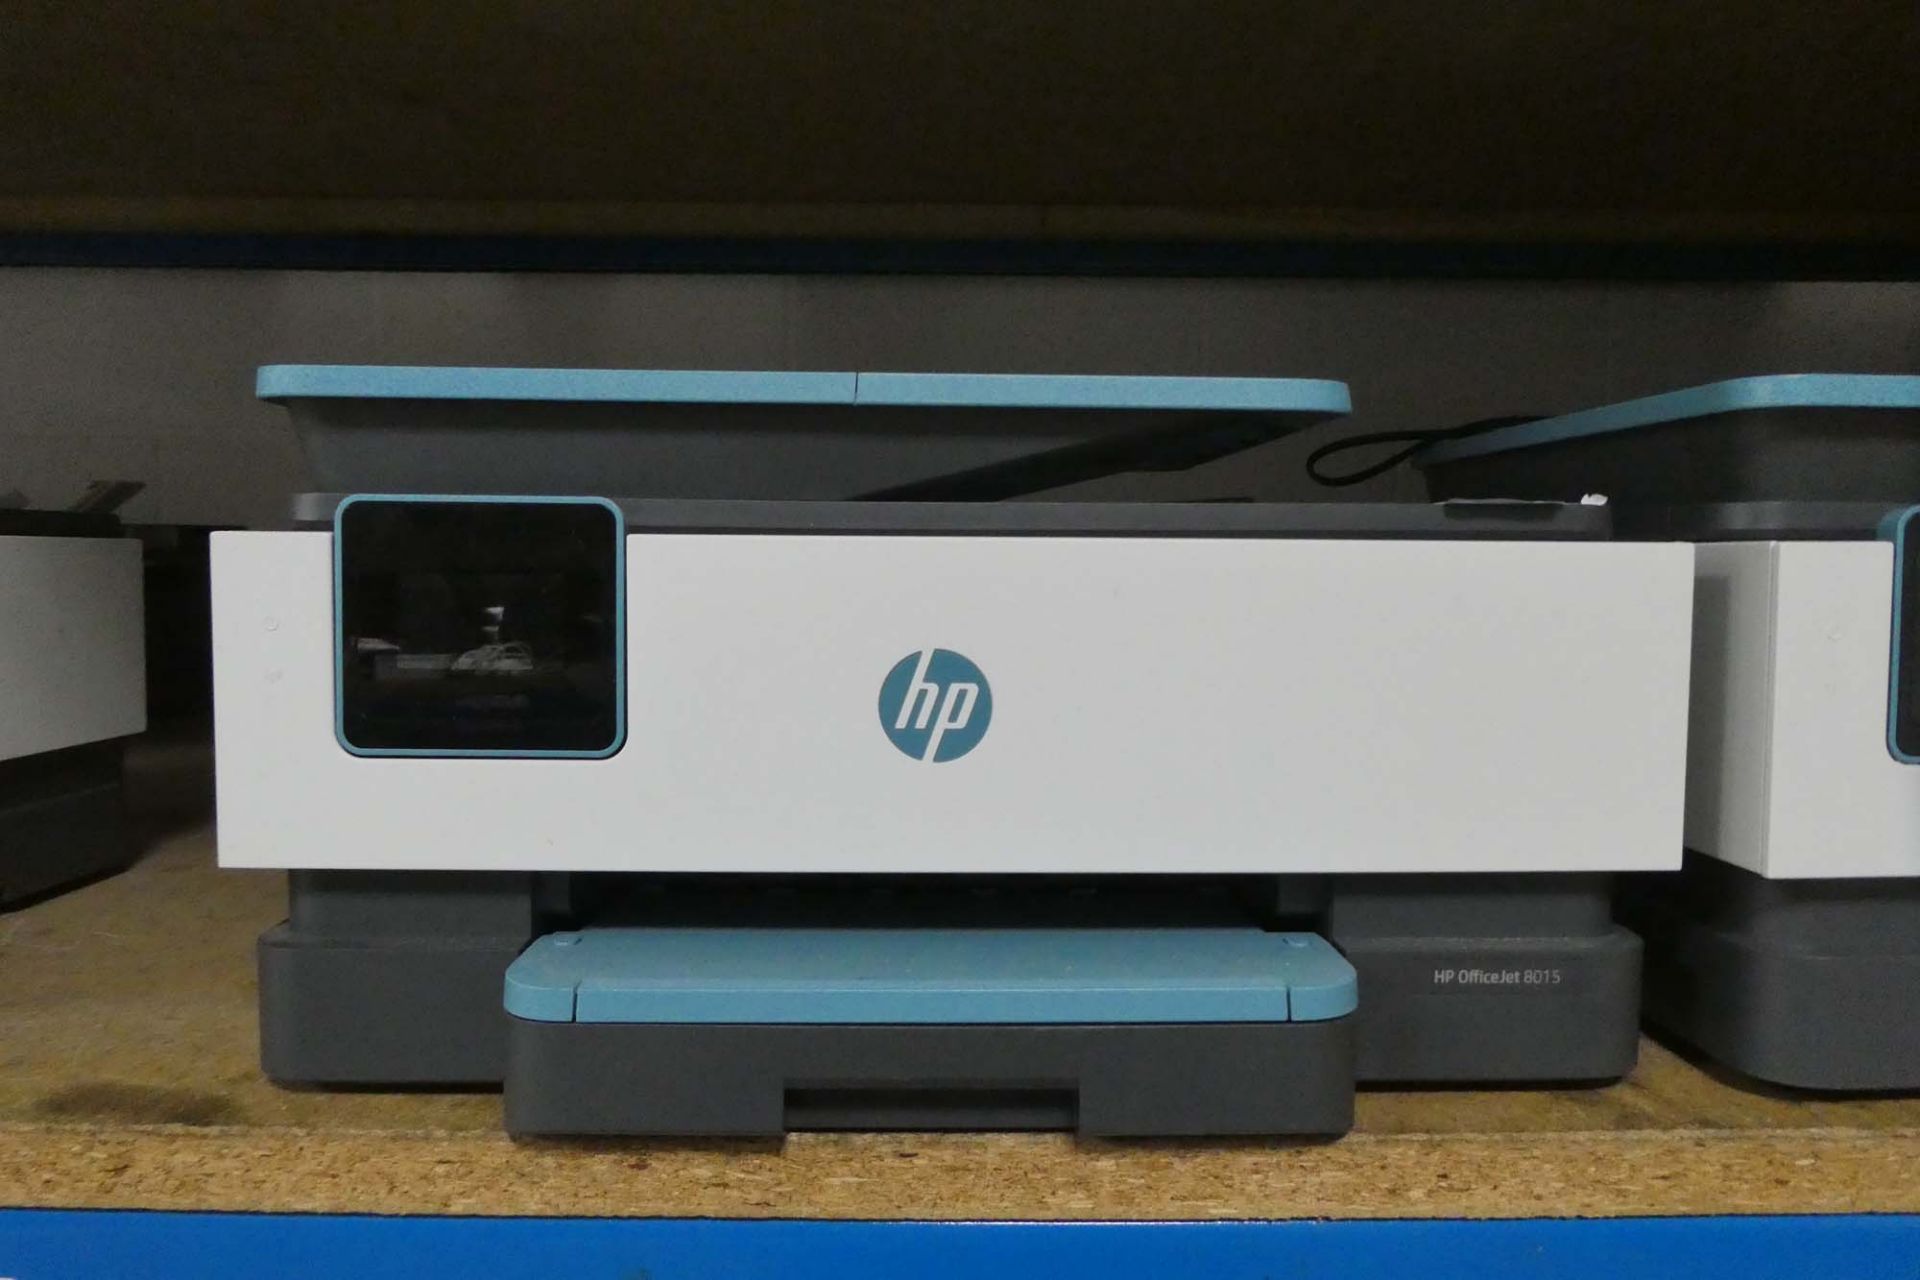 2244 - HP OfficeJet 8015 all in one printer